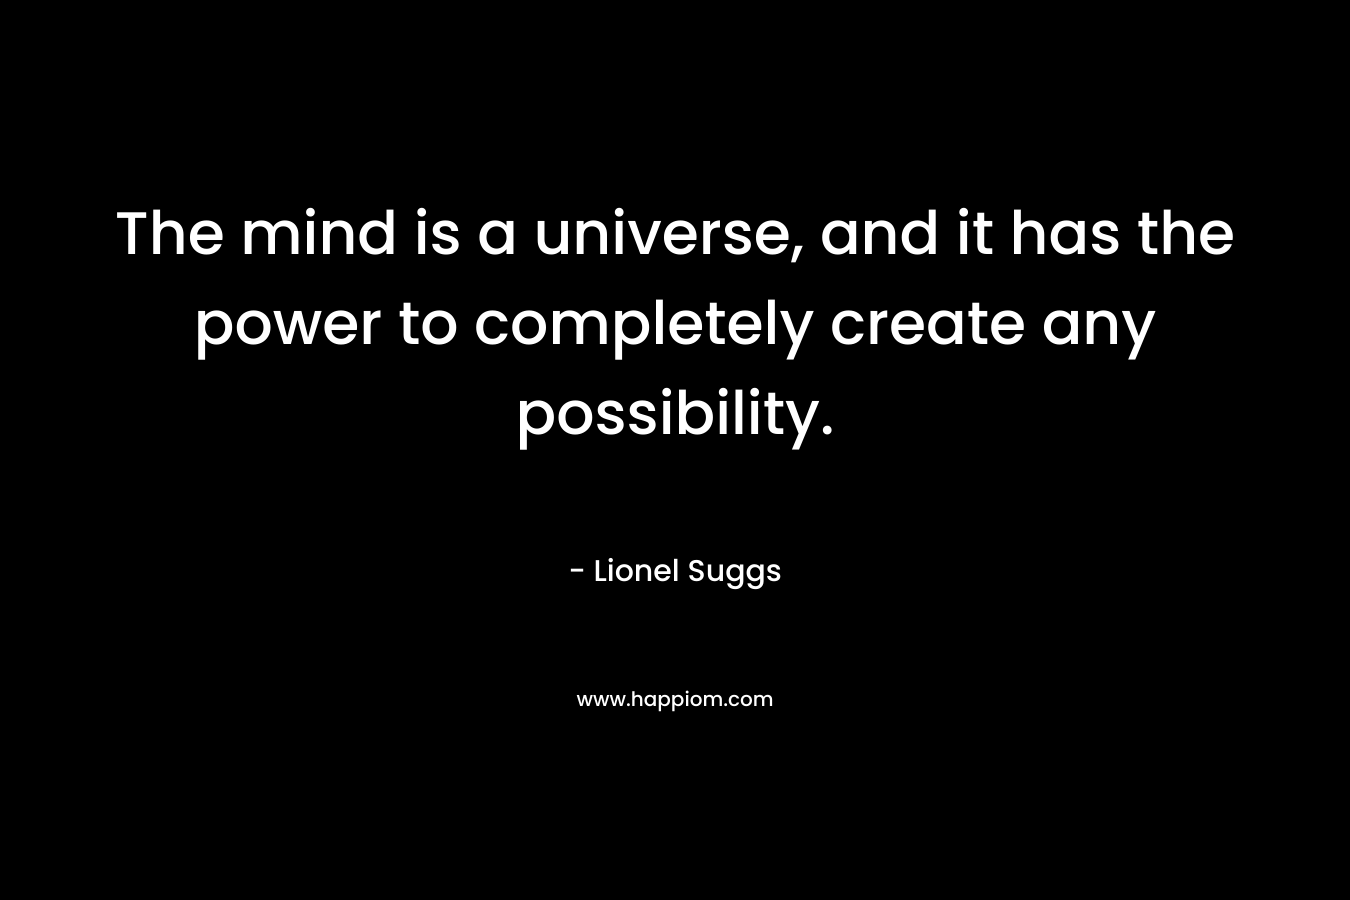 The mind is a universe, and it has the power to completely create any possibility.